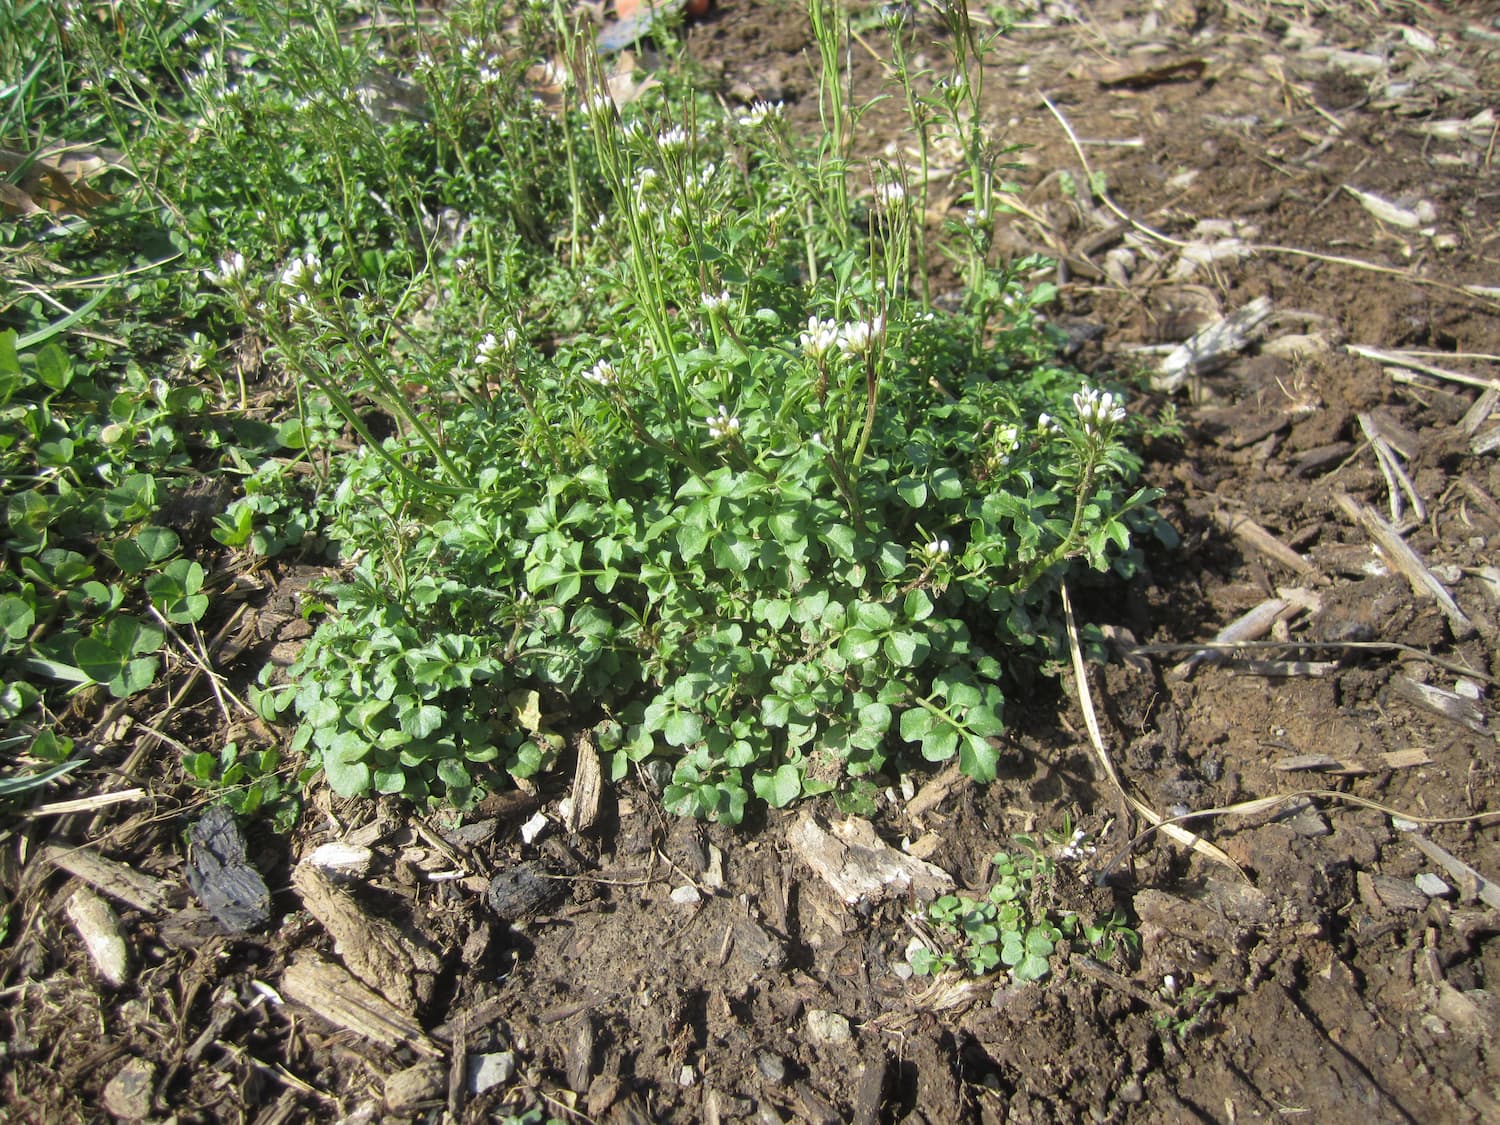 Bittercress can quickly take over bare soil if left unchecked.